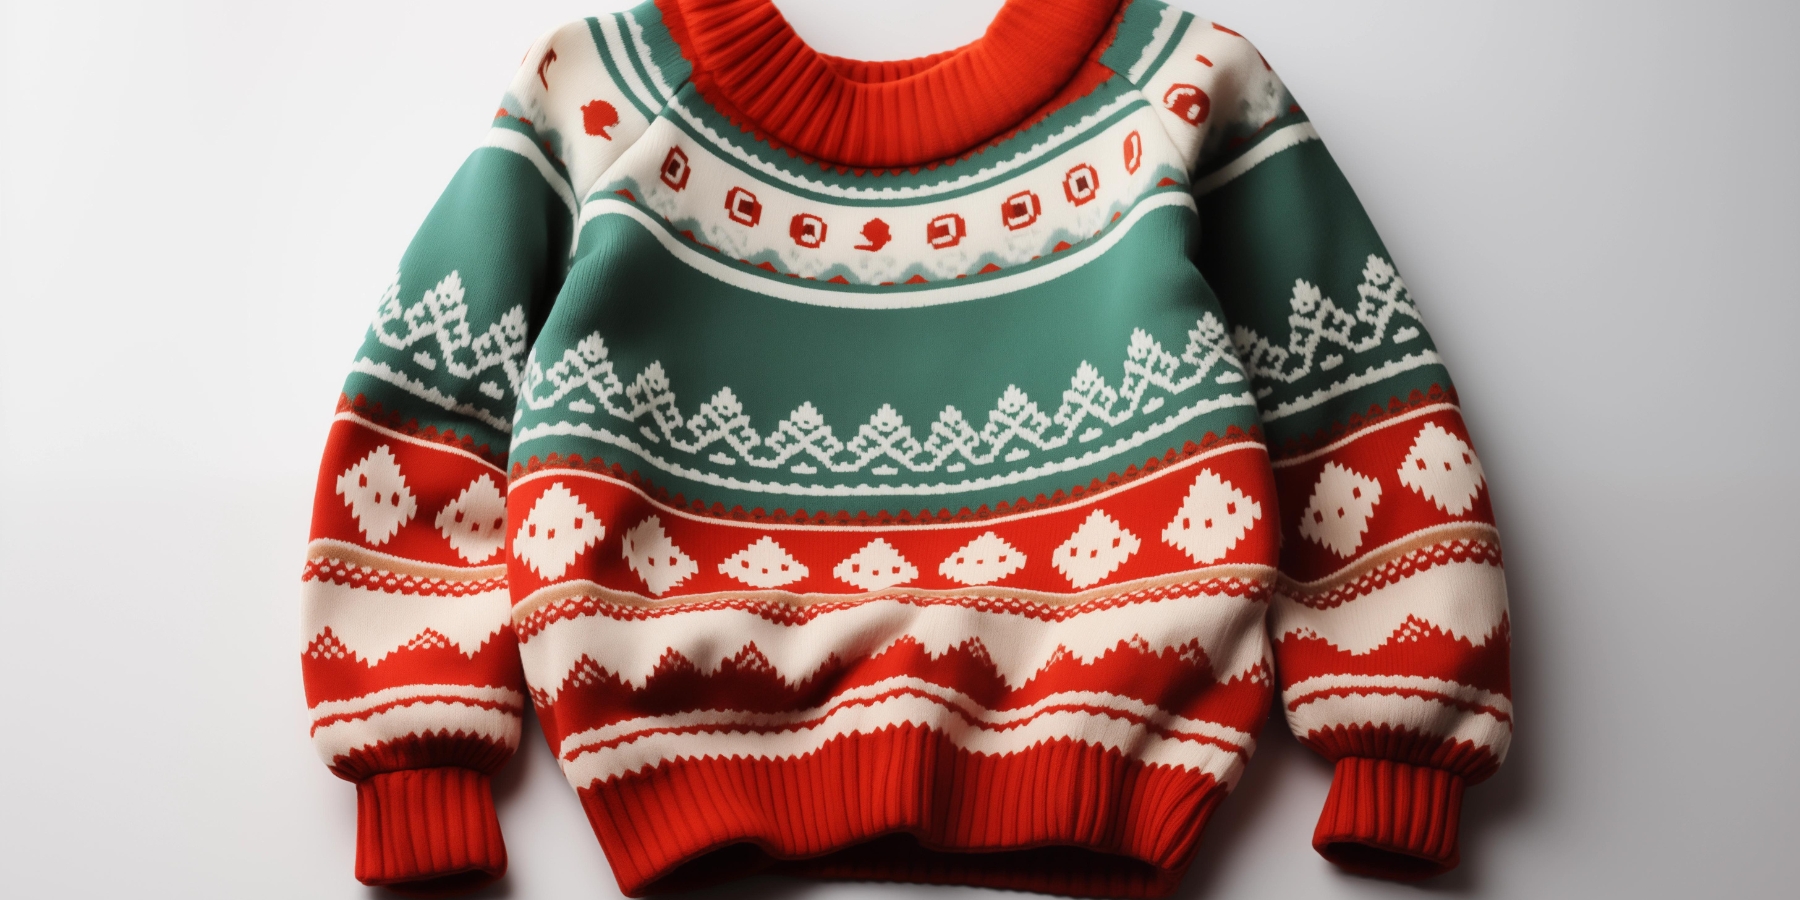 Choose your favorite Christmas sweater style